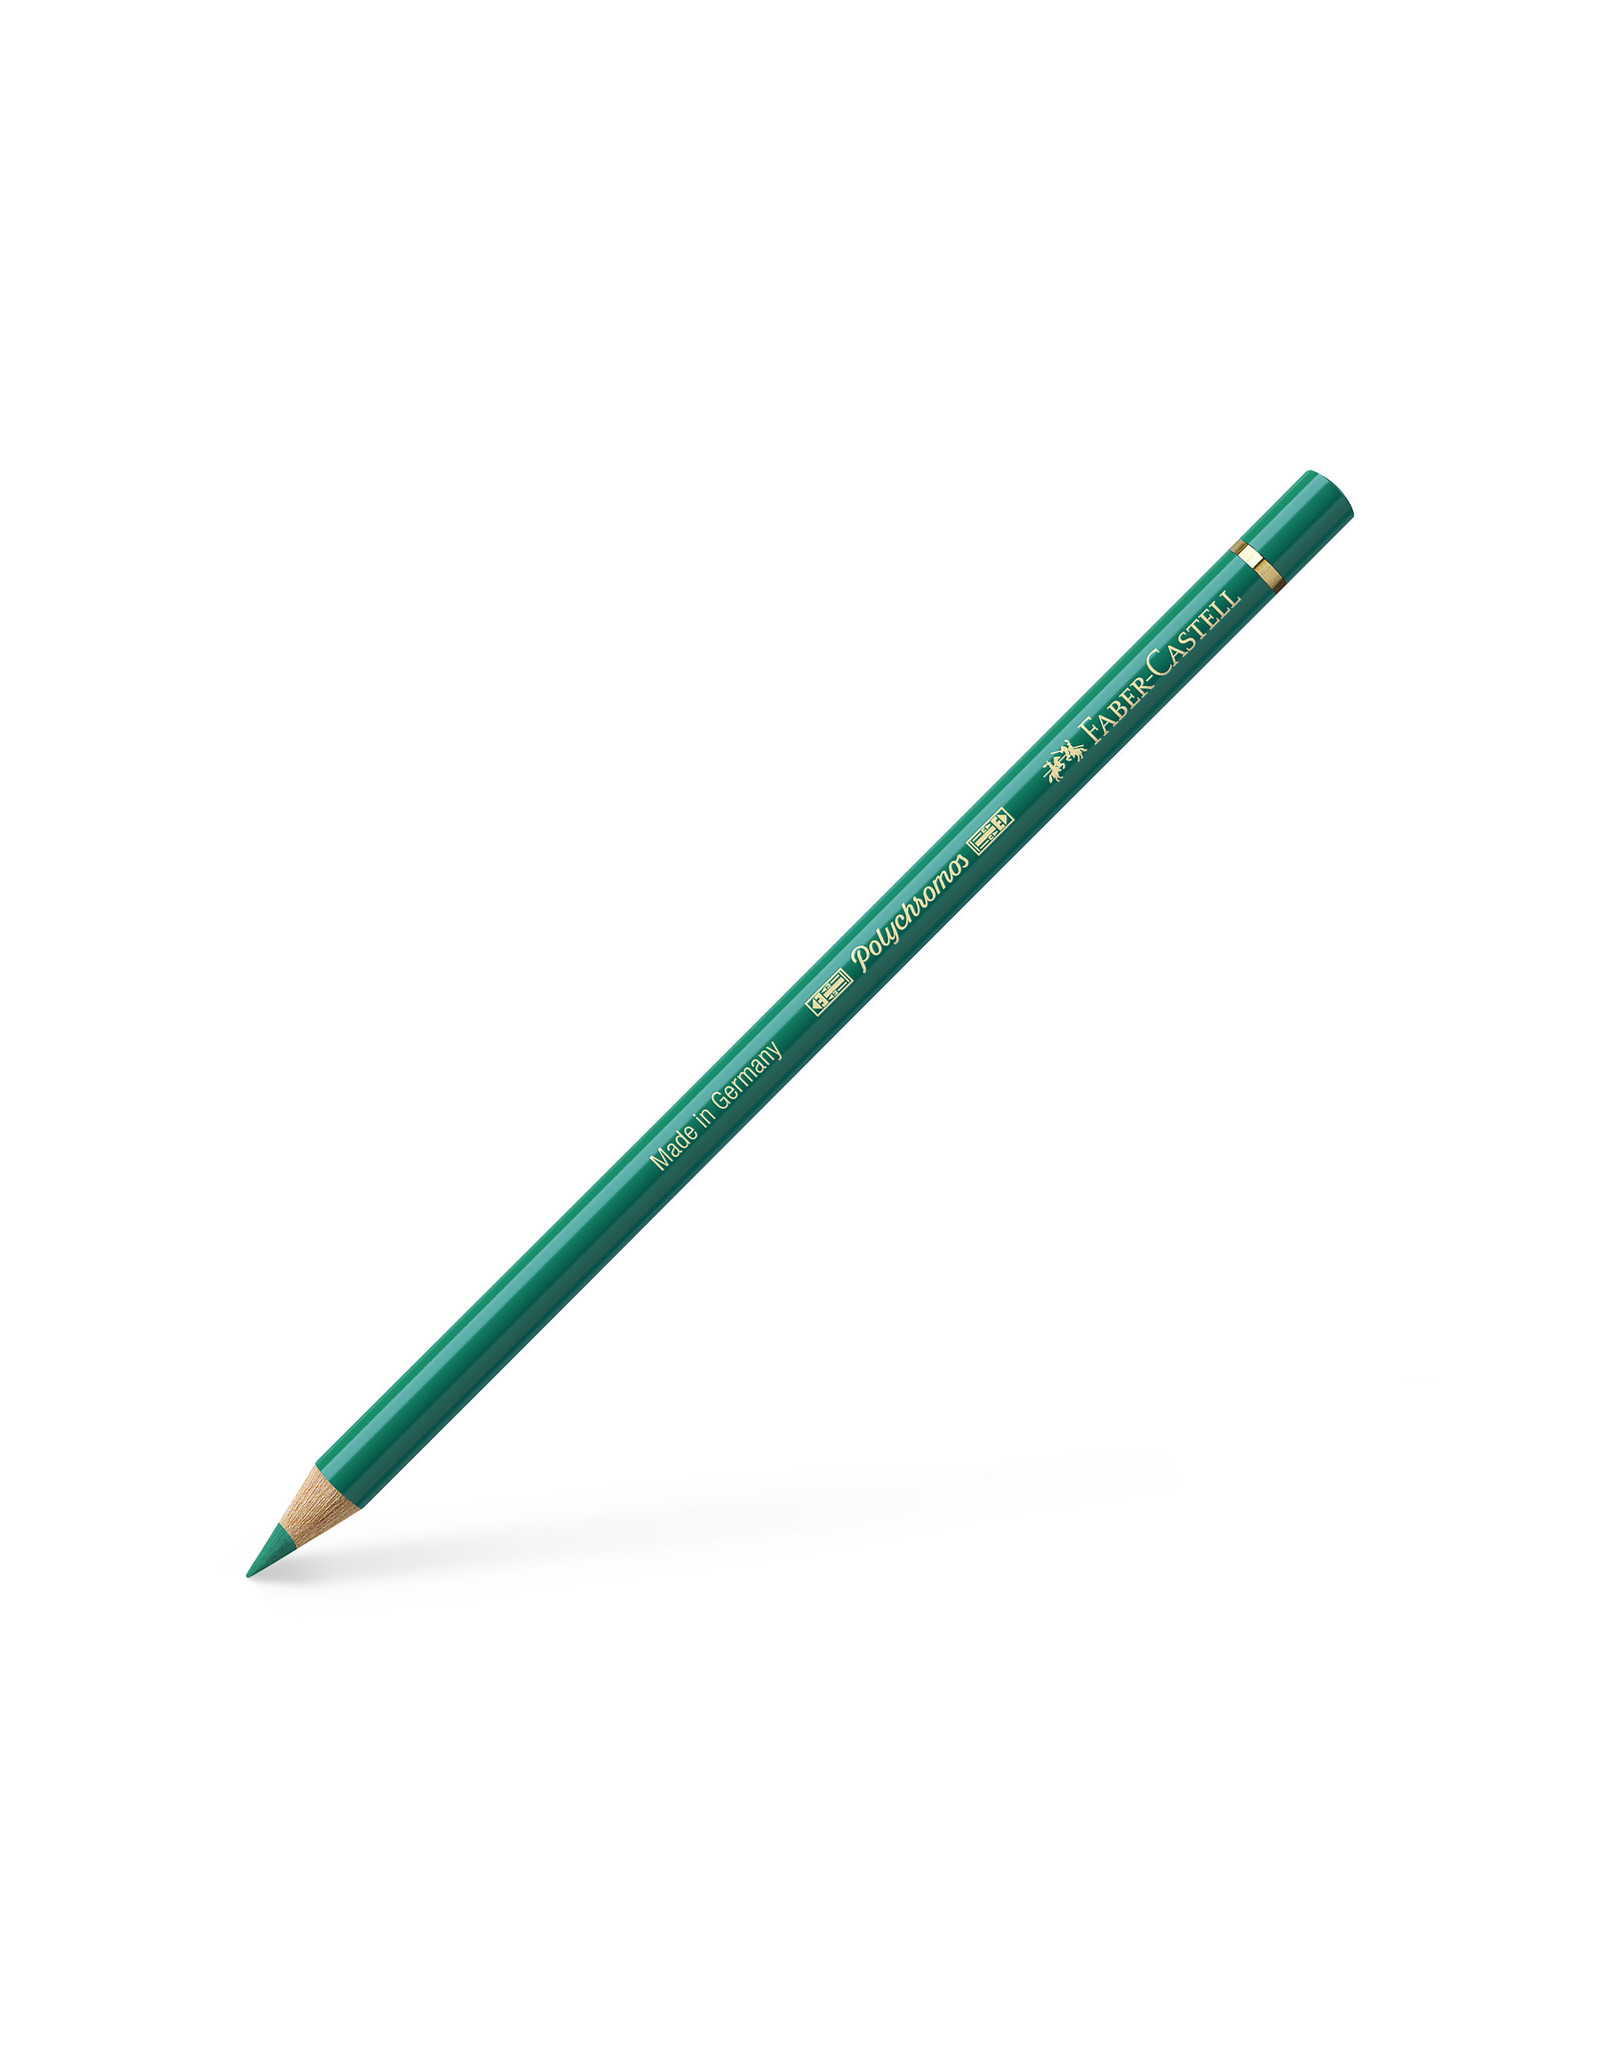 FABER-CASTELL Faber-Castell Polychromos, phthalo Green # 161